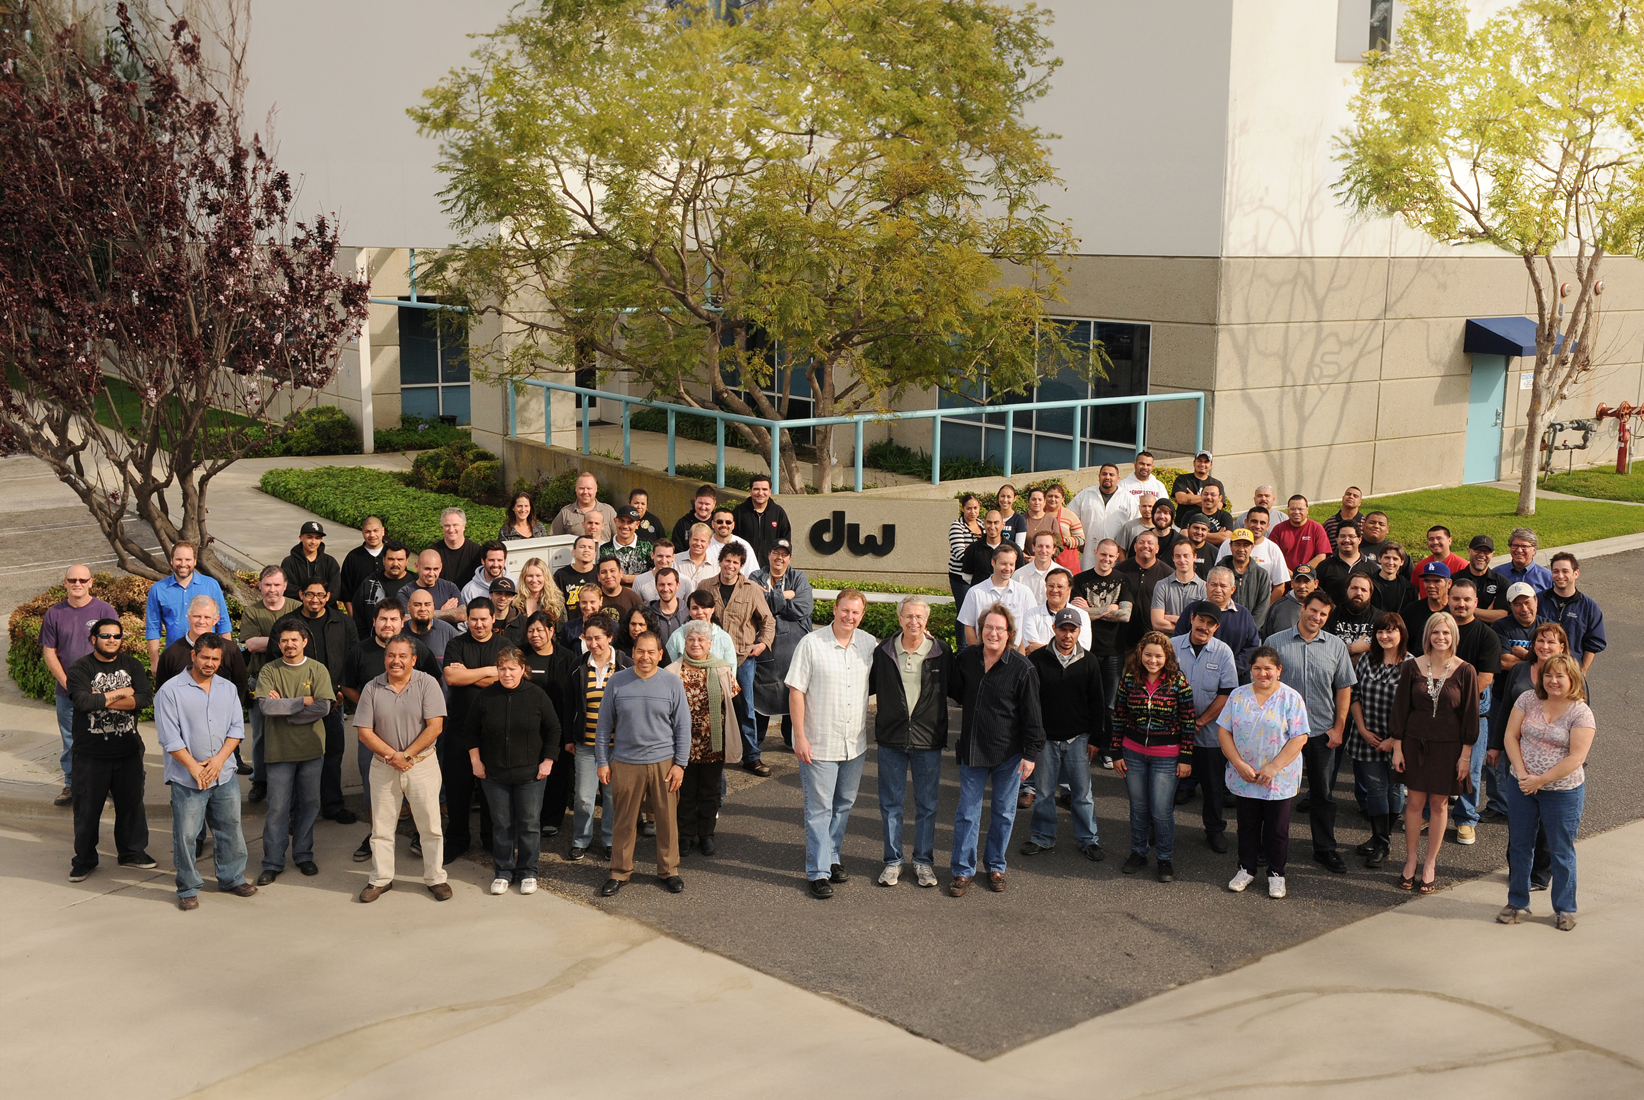 DW employees standing in front of the DW warehouse in Oxnard CA